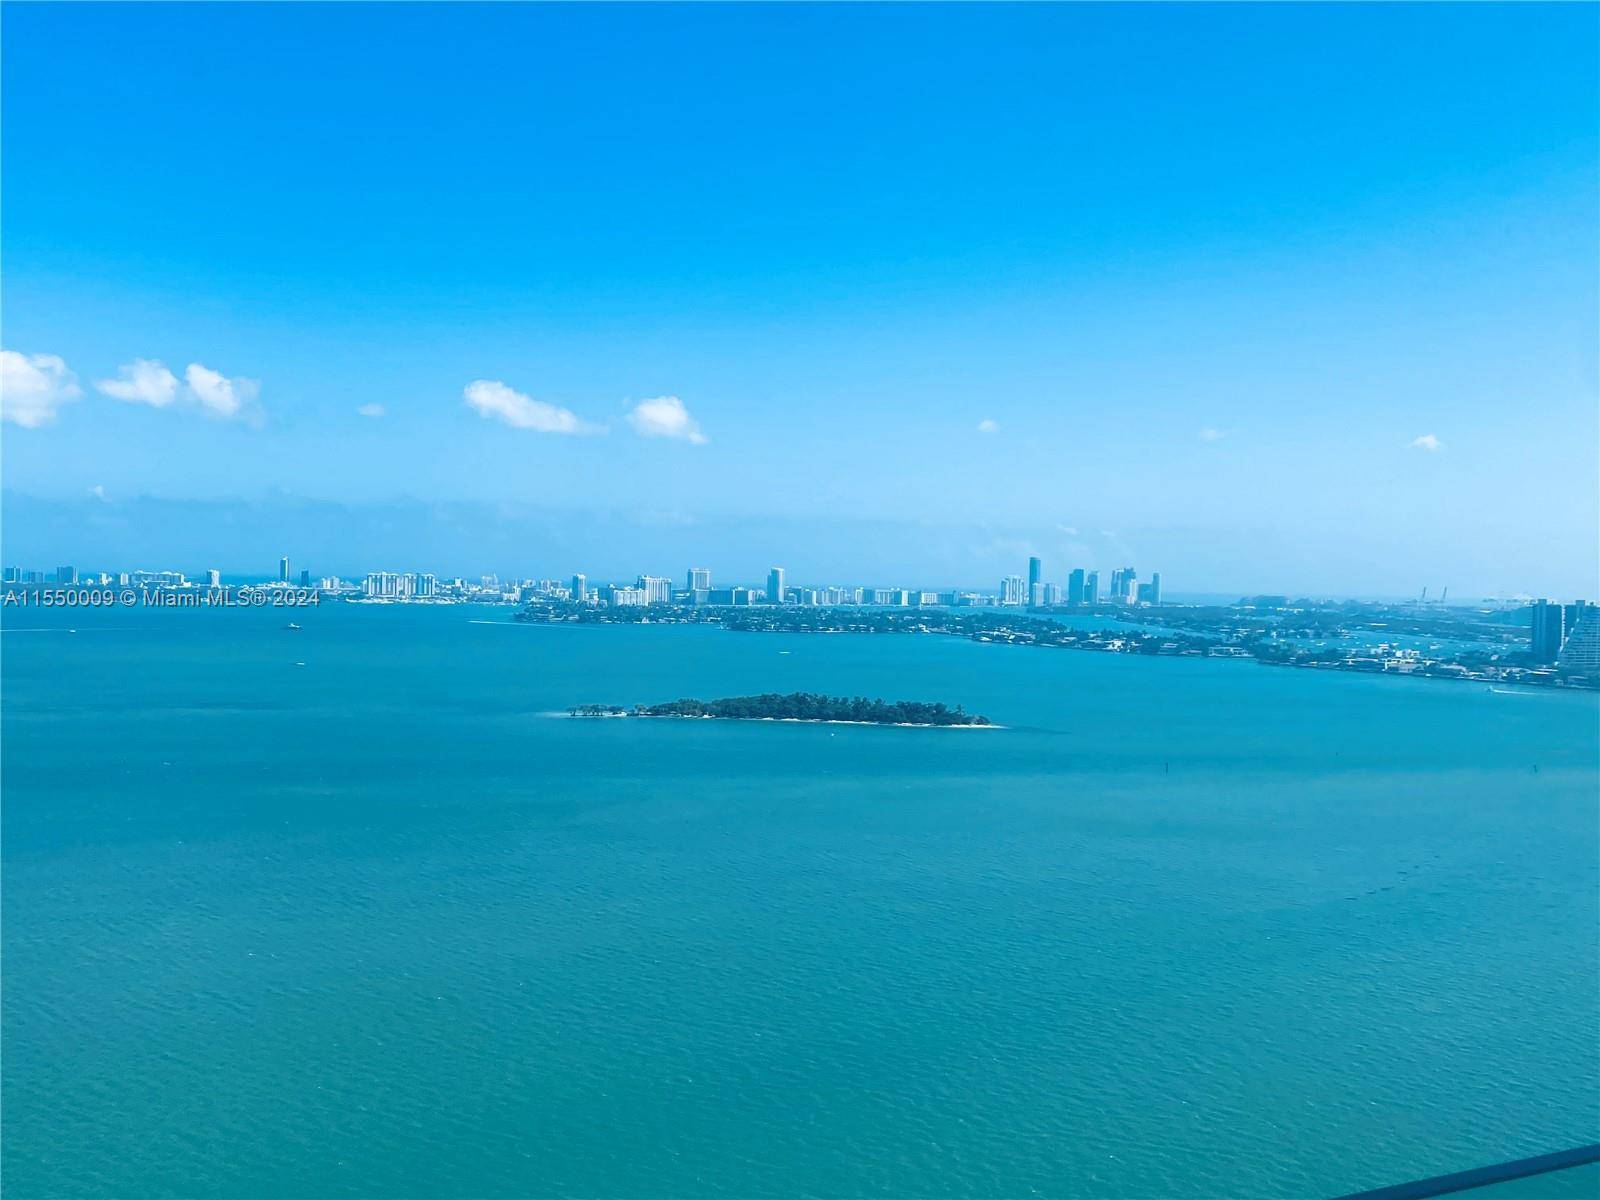 With an impressive 200 feet of frontage on Biscayne Bay, this residence has unobstructed views of the bay from every room in the apartment.